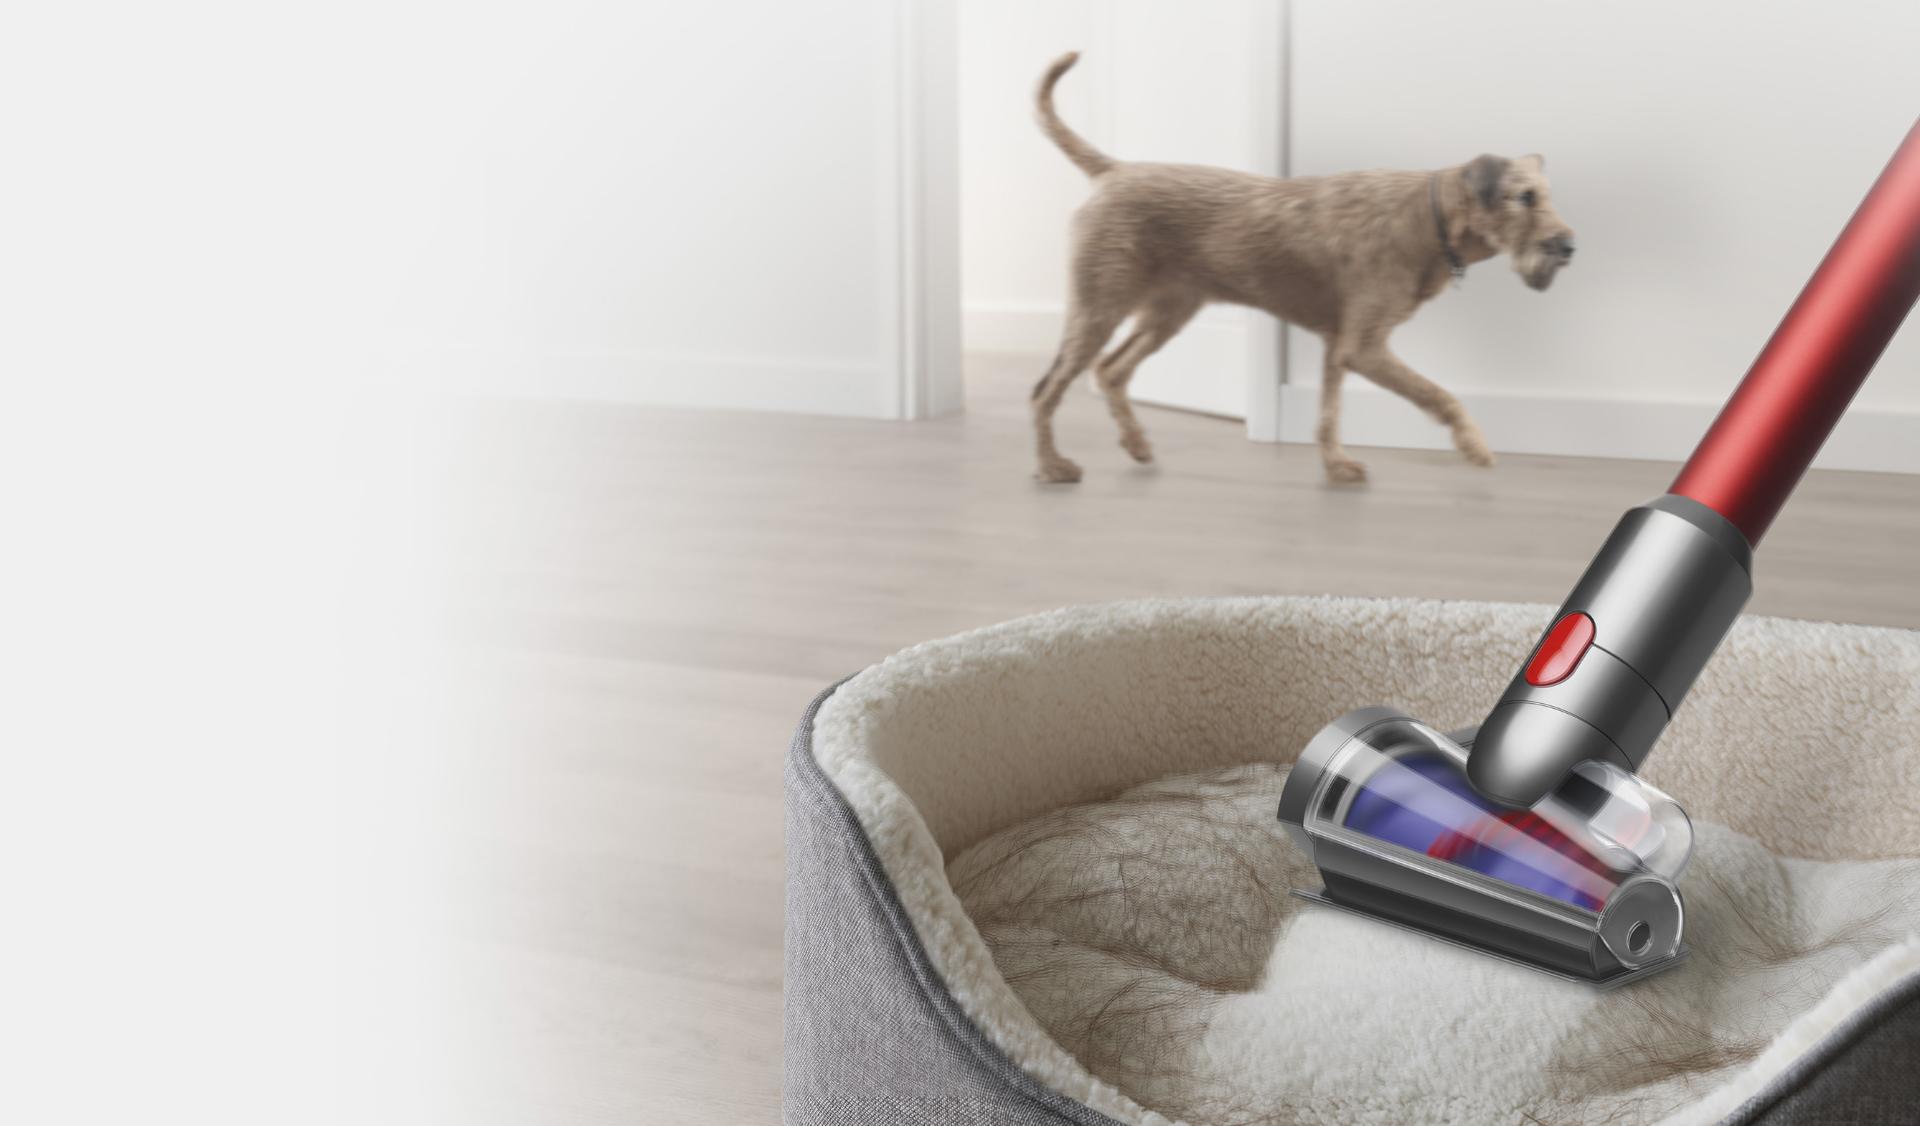 Dyson Outsize vacuum with Hair screw tool attachment cleaning hair from a dog bed